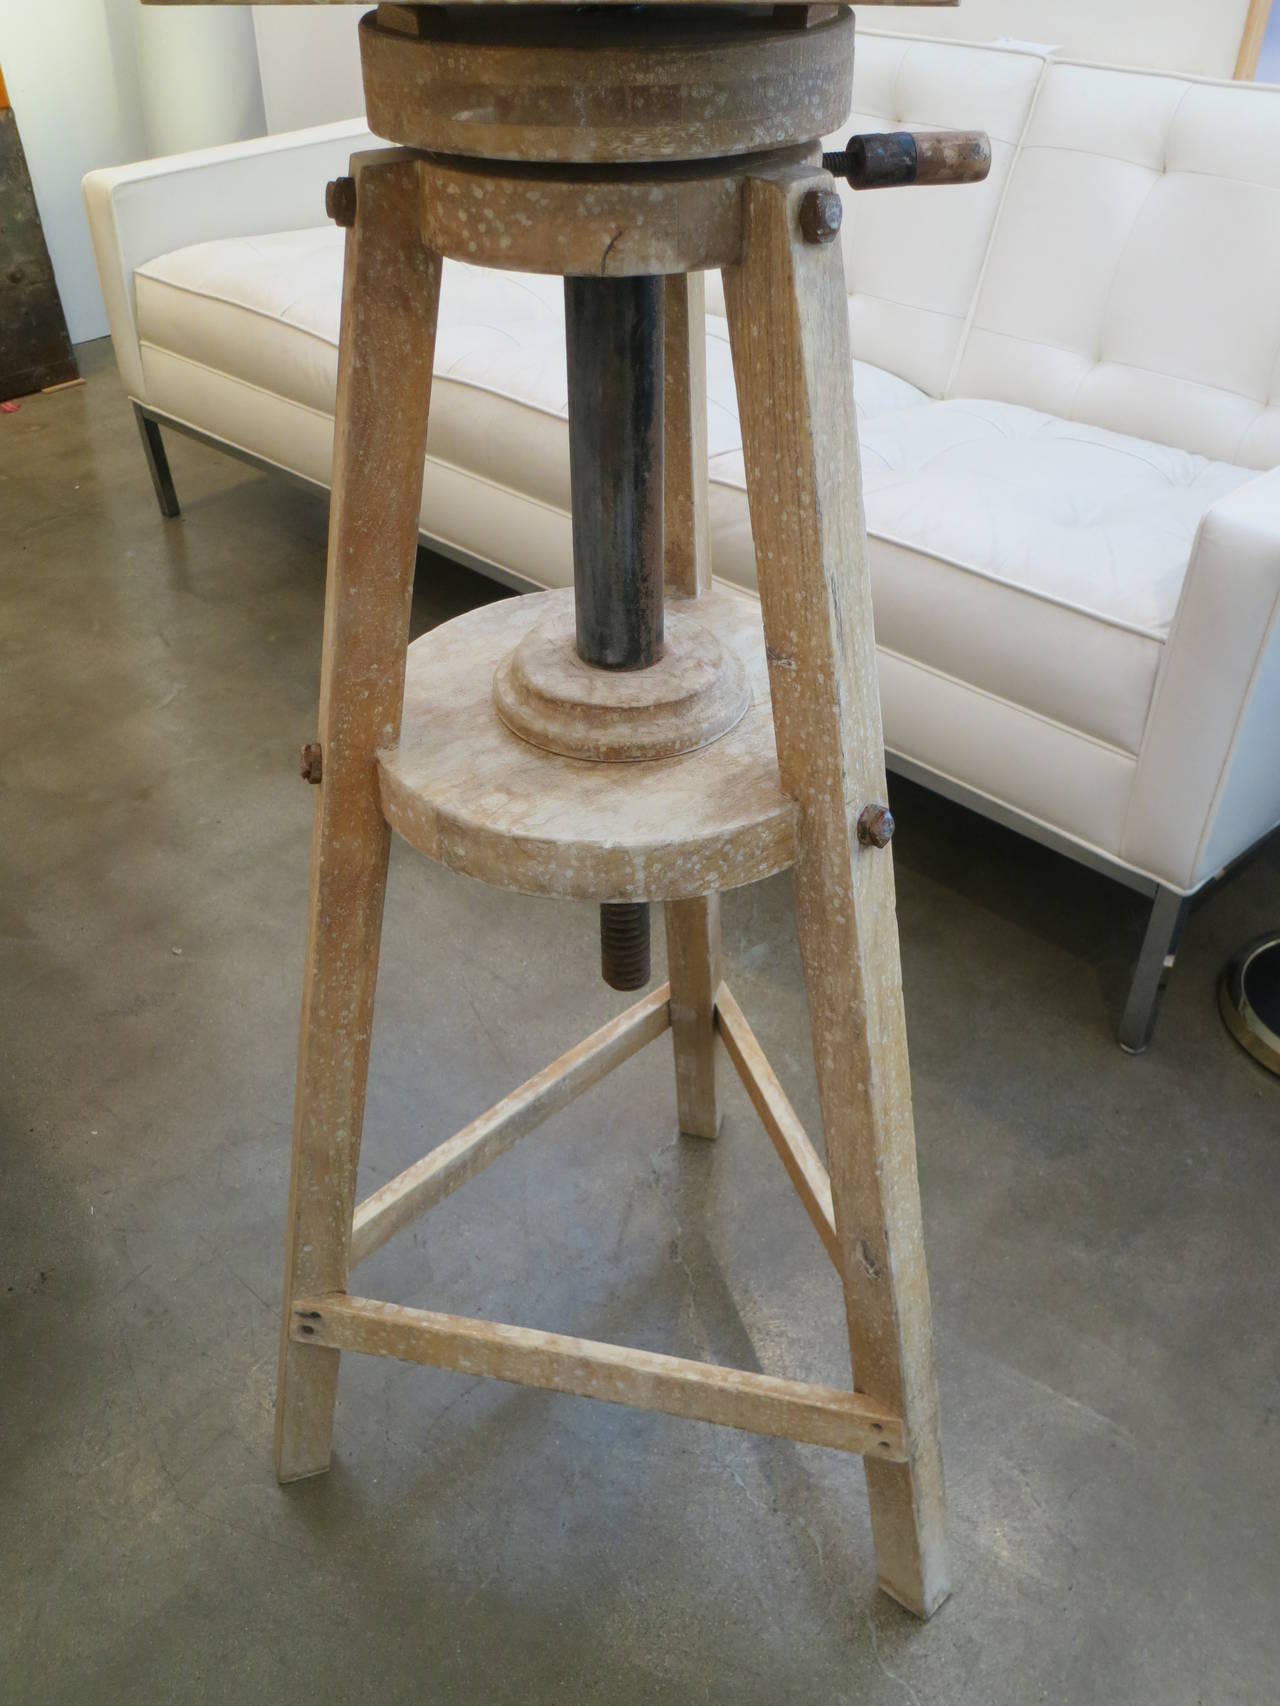 This is a great vintage piece. The color and patina is so soft. The top is a steel plate. It is fully adjustable to display your favorite item! The height listed is for the platform at its lowest. The larger dimension is the distance from leg to leg